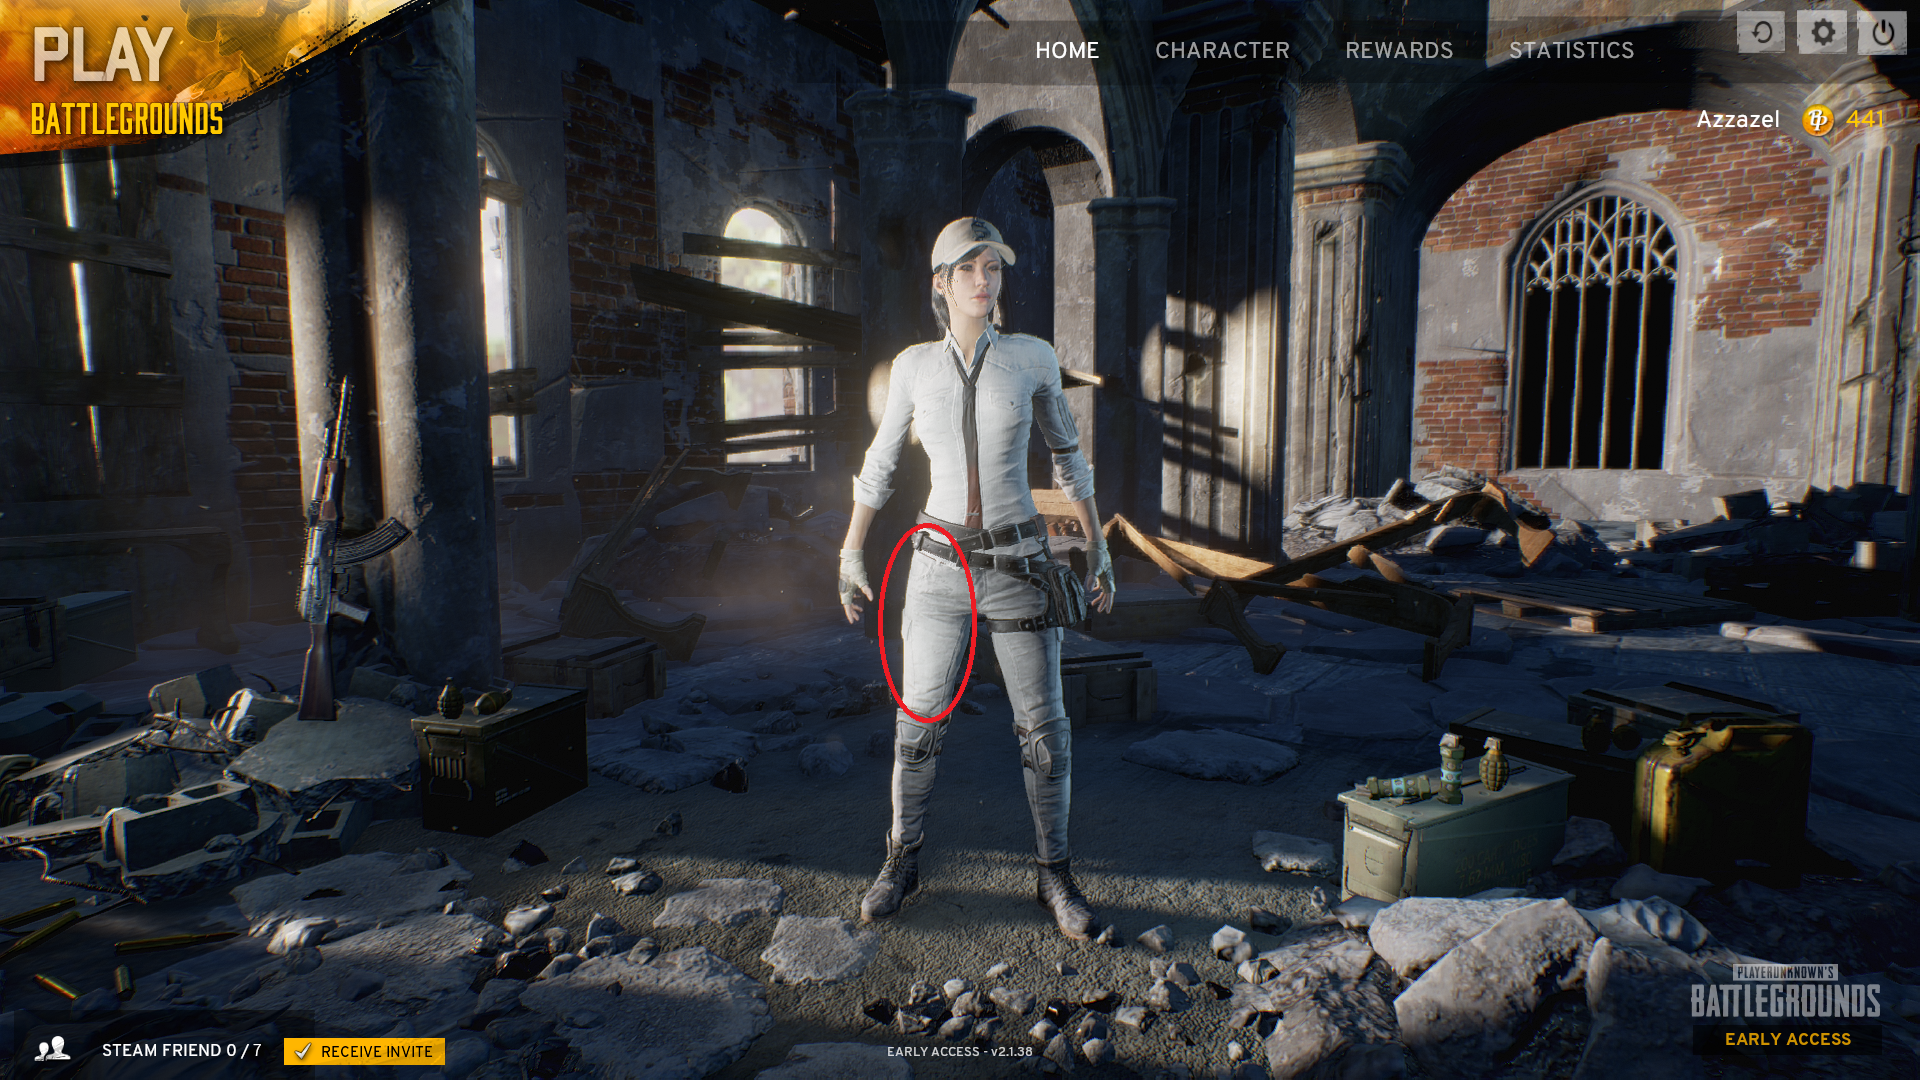 Camel toes in PlayerUnknown's Battlegrounds won't make it to live